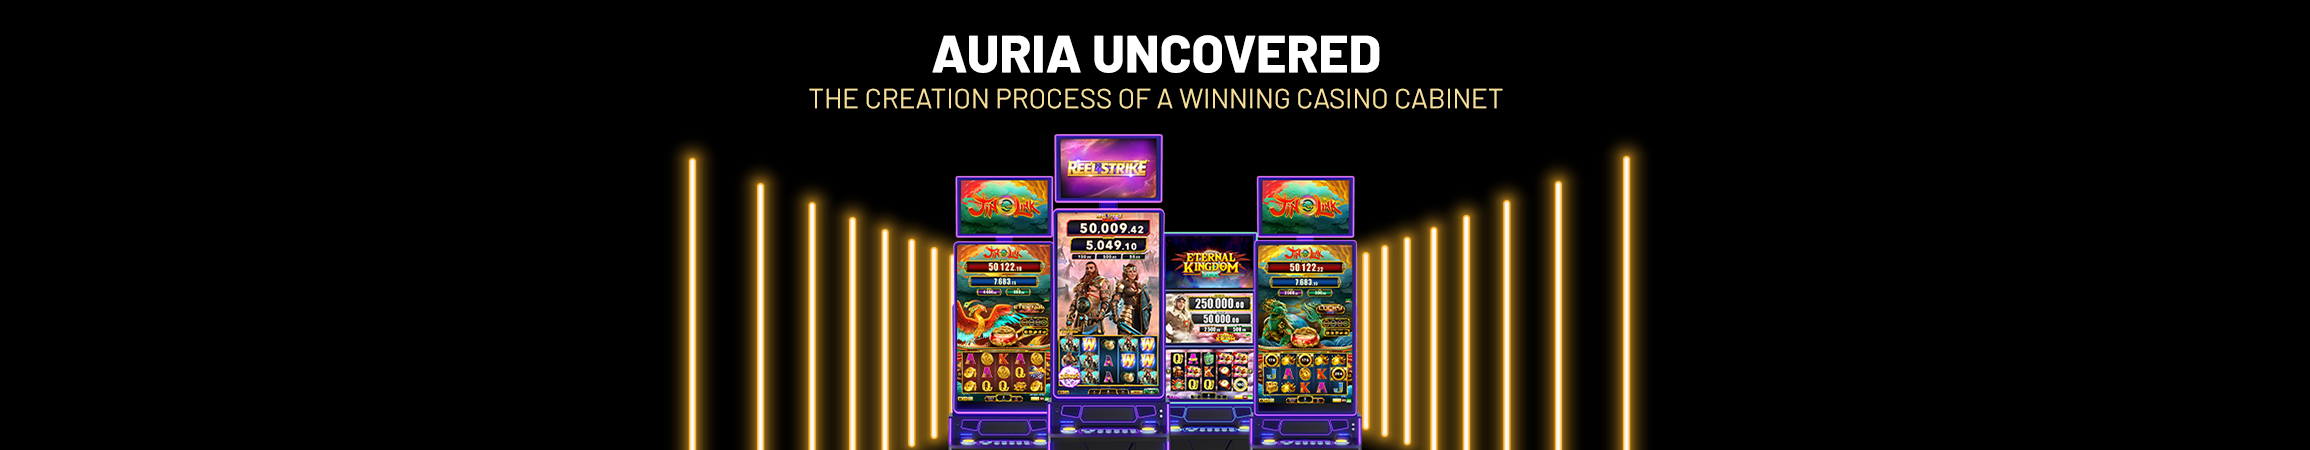 Auria: the creation process behind a winning casino cabinet